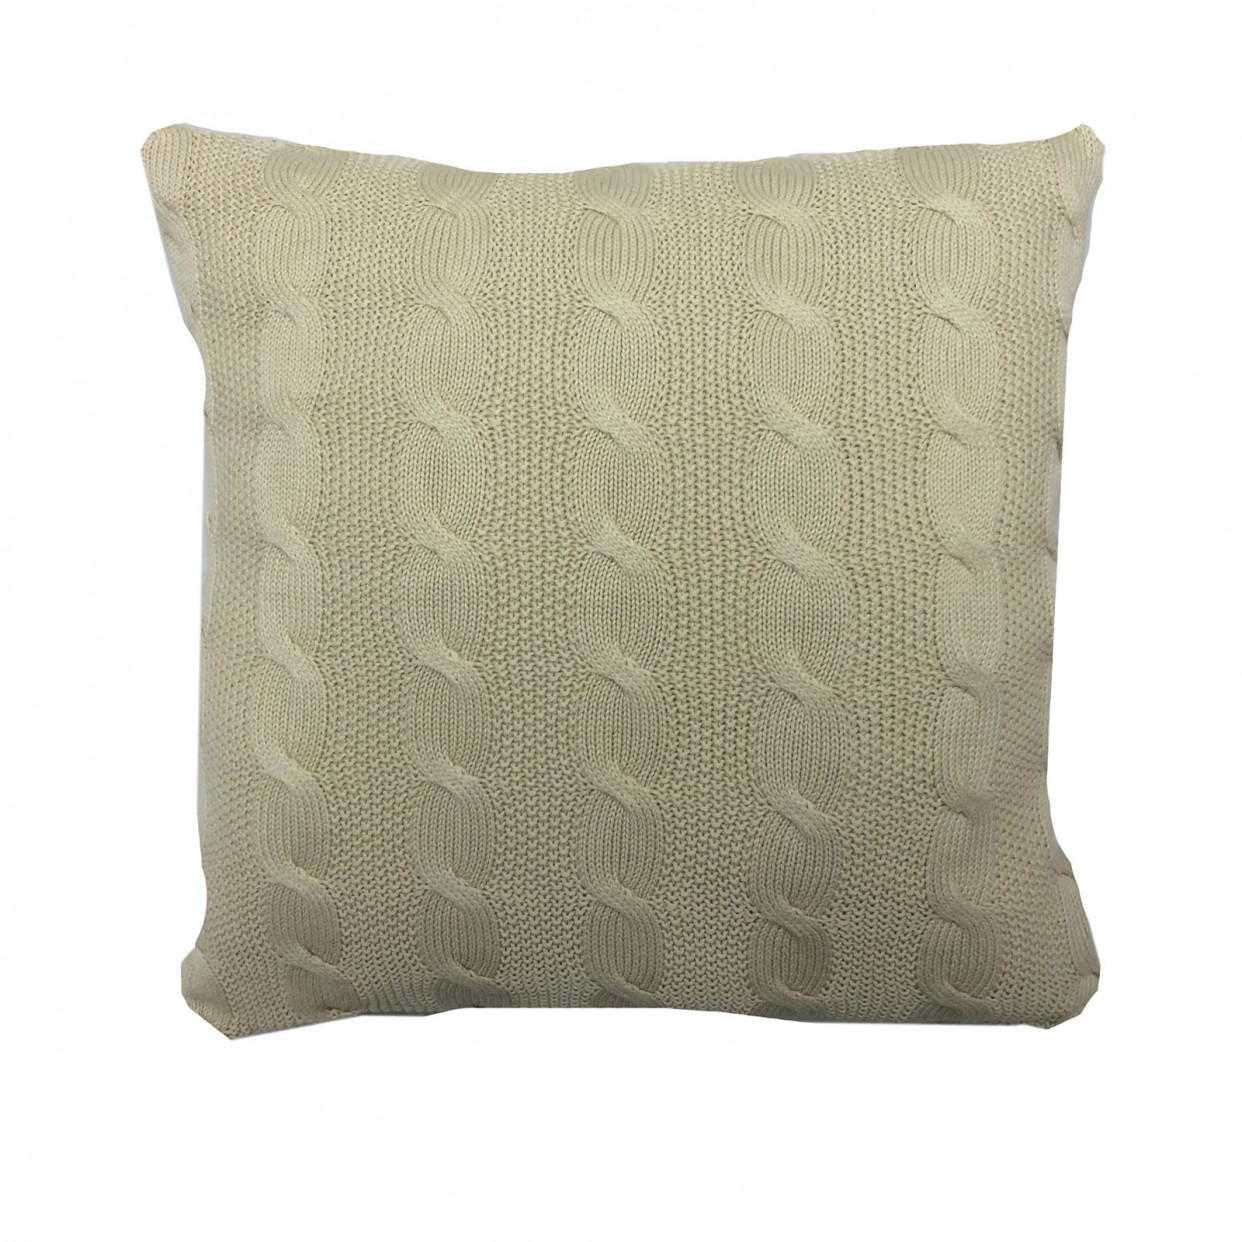 Highams Cable Knit 100% Cotton Cushion Cover - Natural Beige>